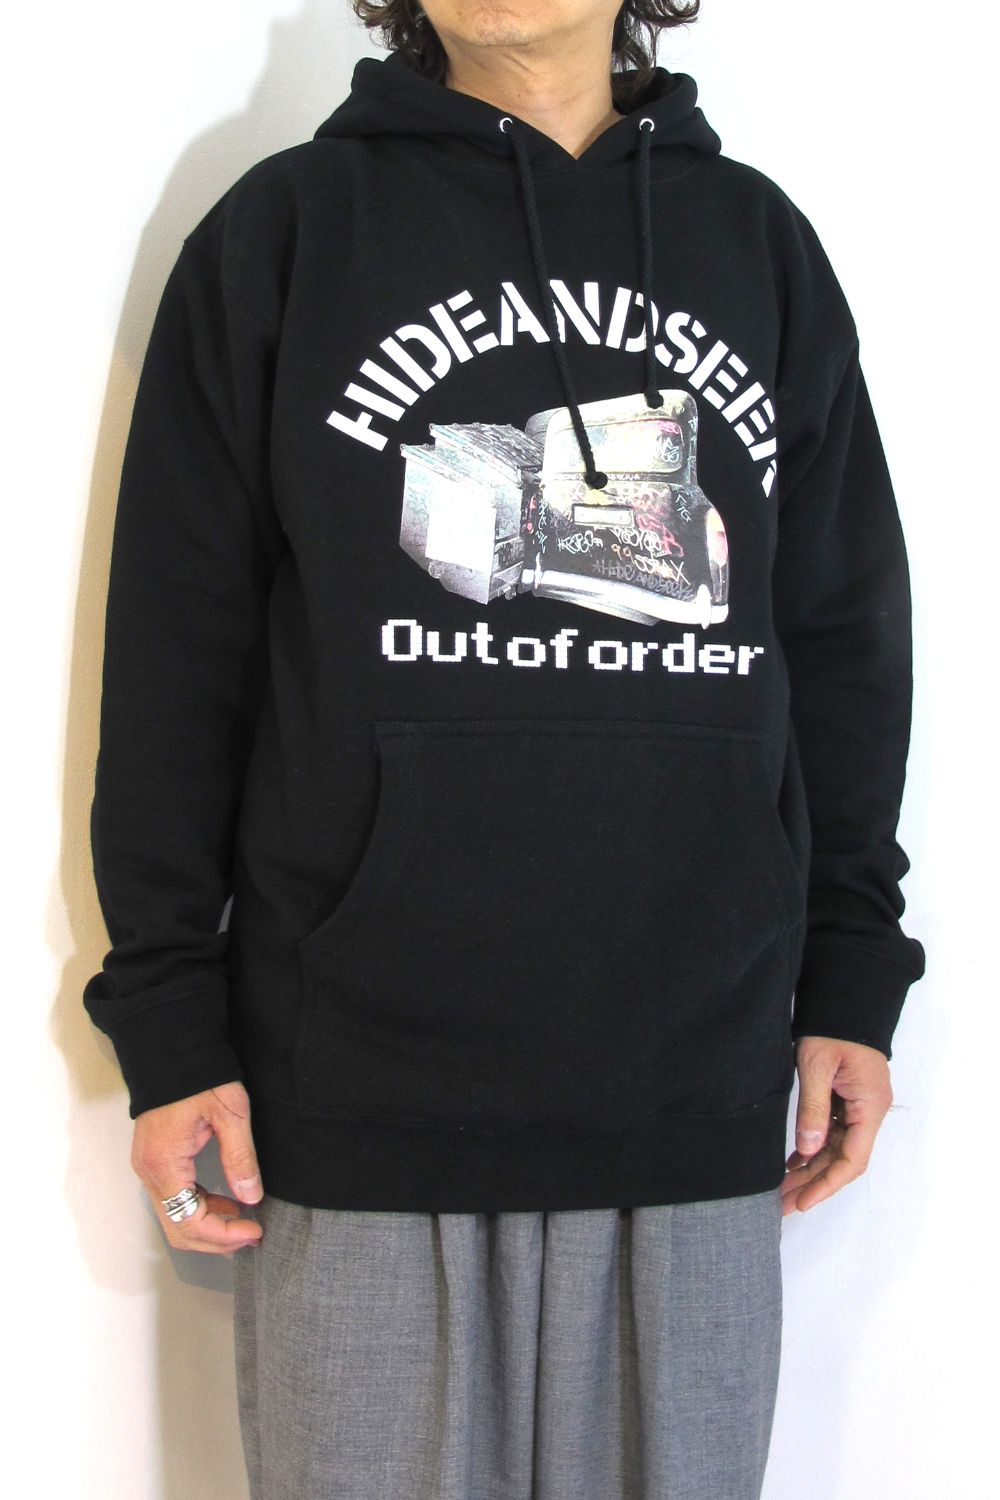 HIDE AND SEEK - OUT OF ORDER HOODED SWEAT SHIRT (BLACK) / アウト